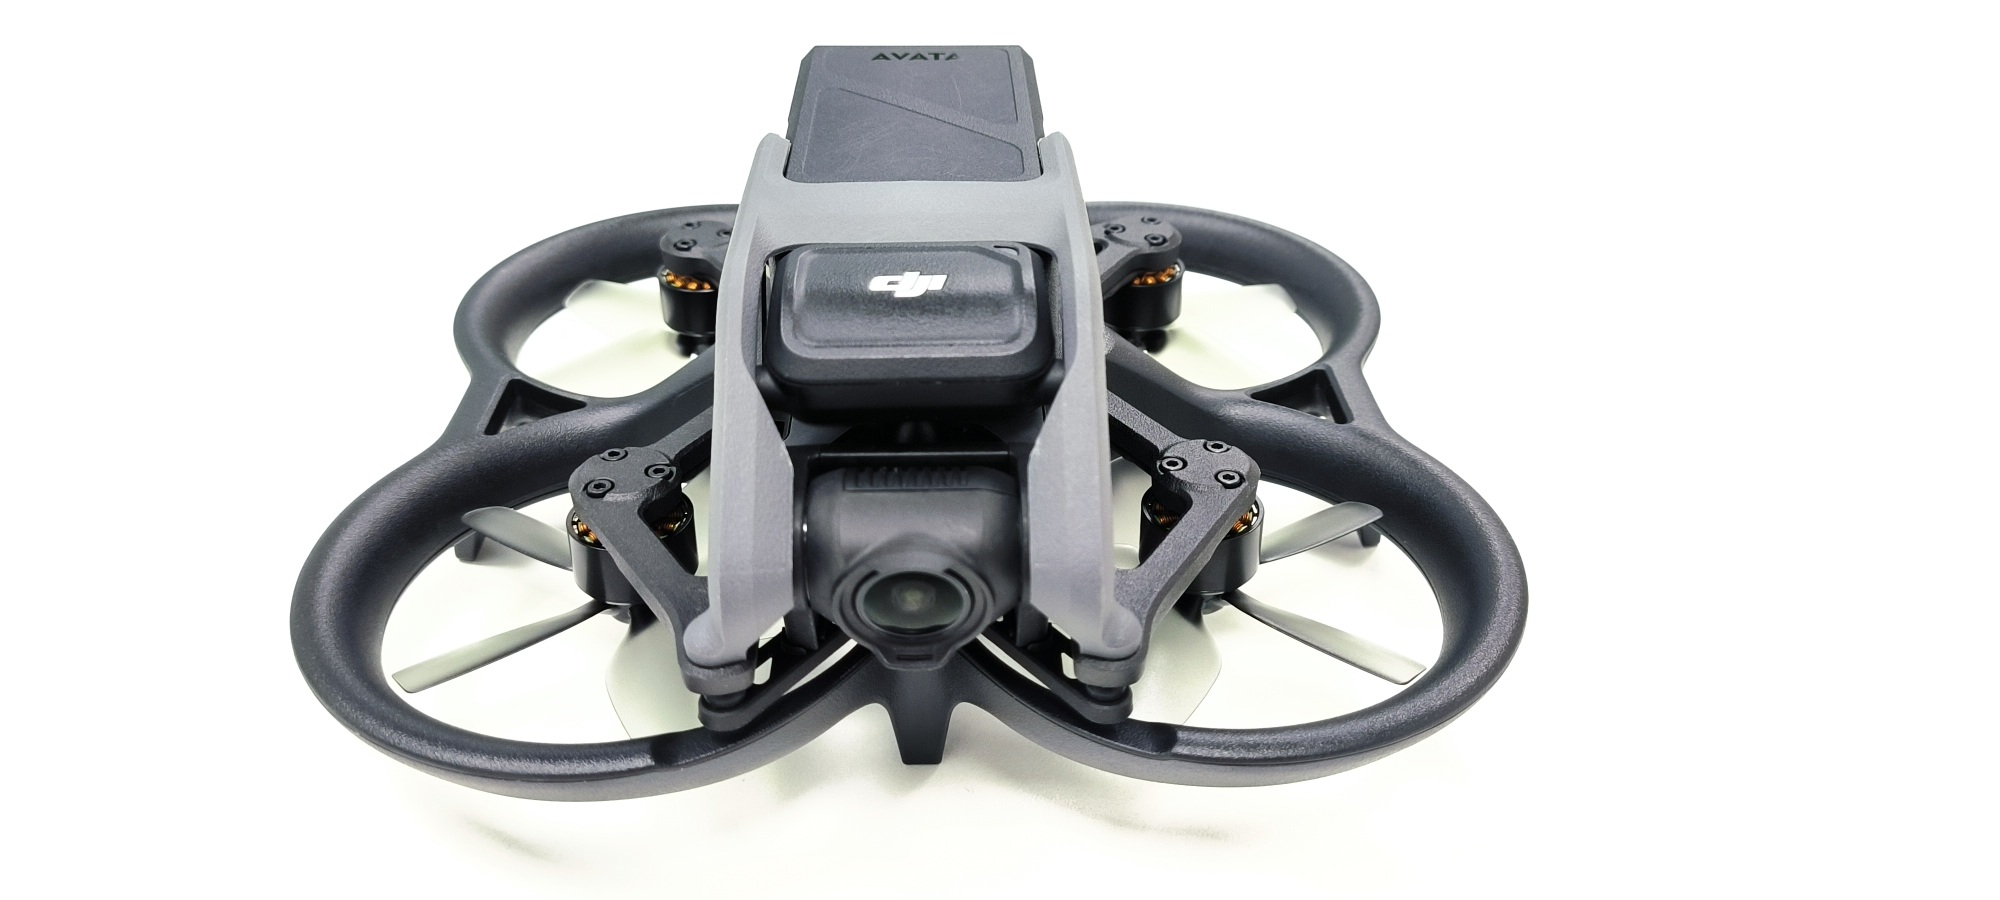 DJI Mavic Mini 2 Drone Only for Replacement/Crash/Lost Drone - Never  Activated - No Battery/Charger/Remote